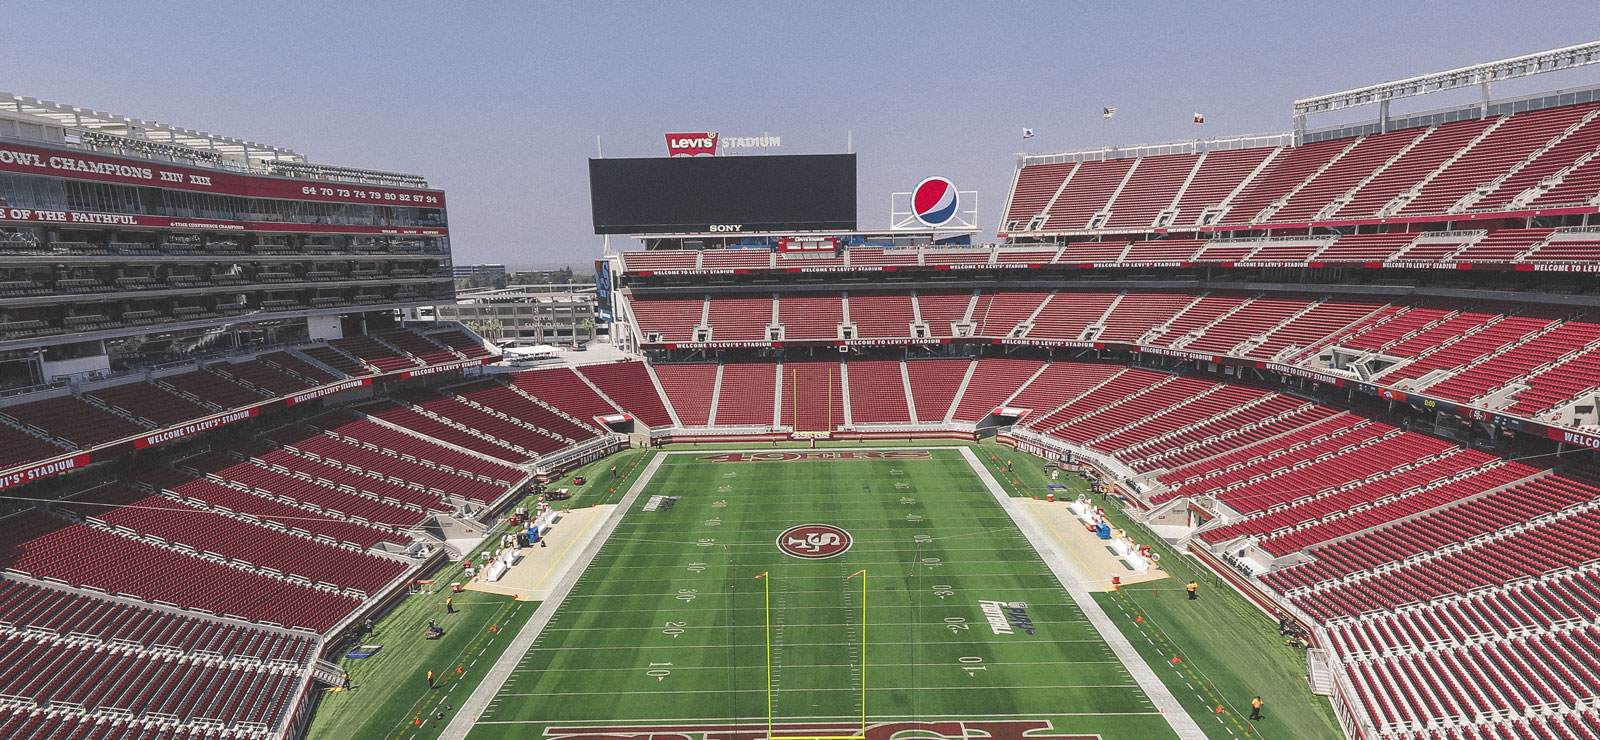 Vista Kicks to Open for the Rolling Stones on August 18 - Levi's® Stadium